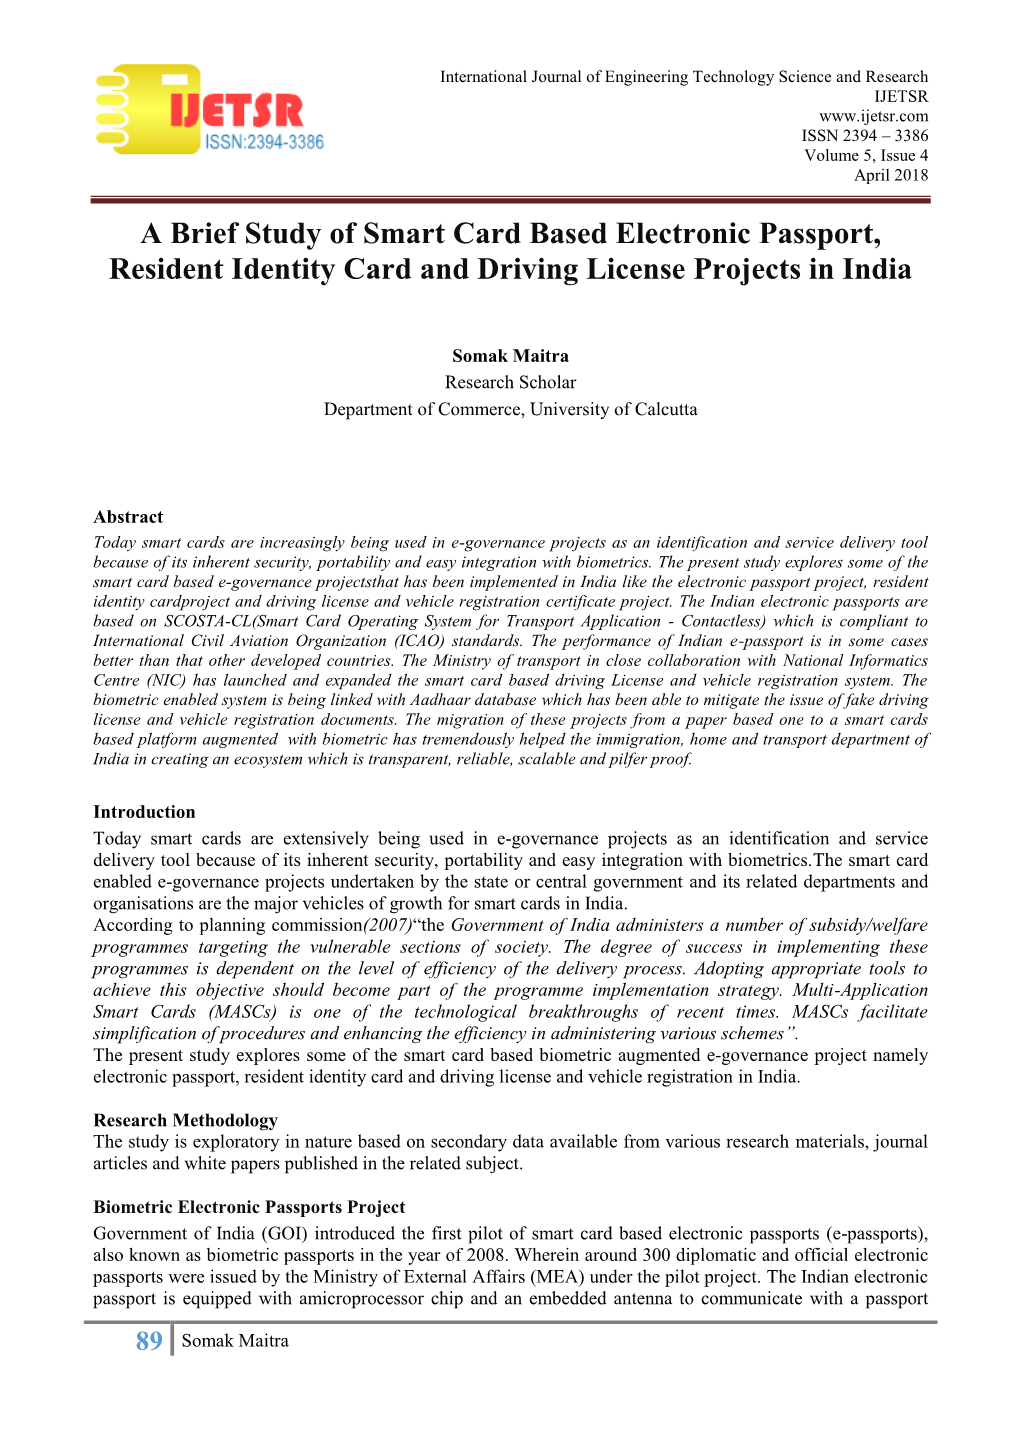 A Brief Study of Smart Card Based Electronic Passport, Resident Identity Card and Driving License Projects in India